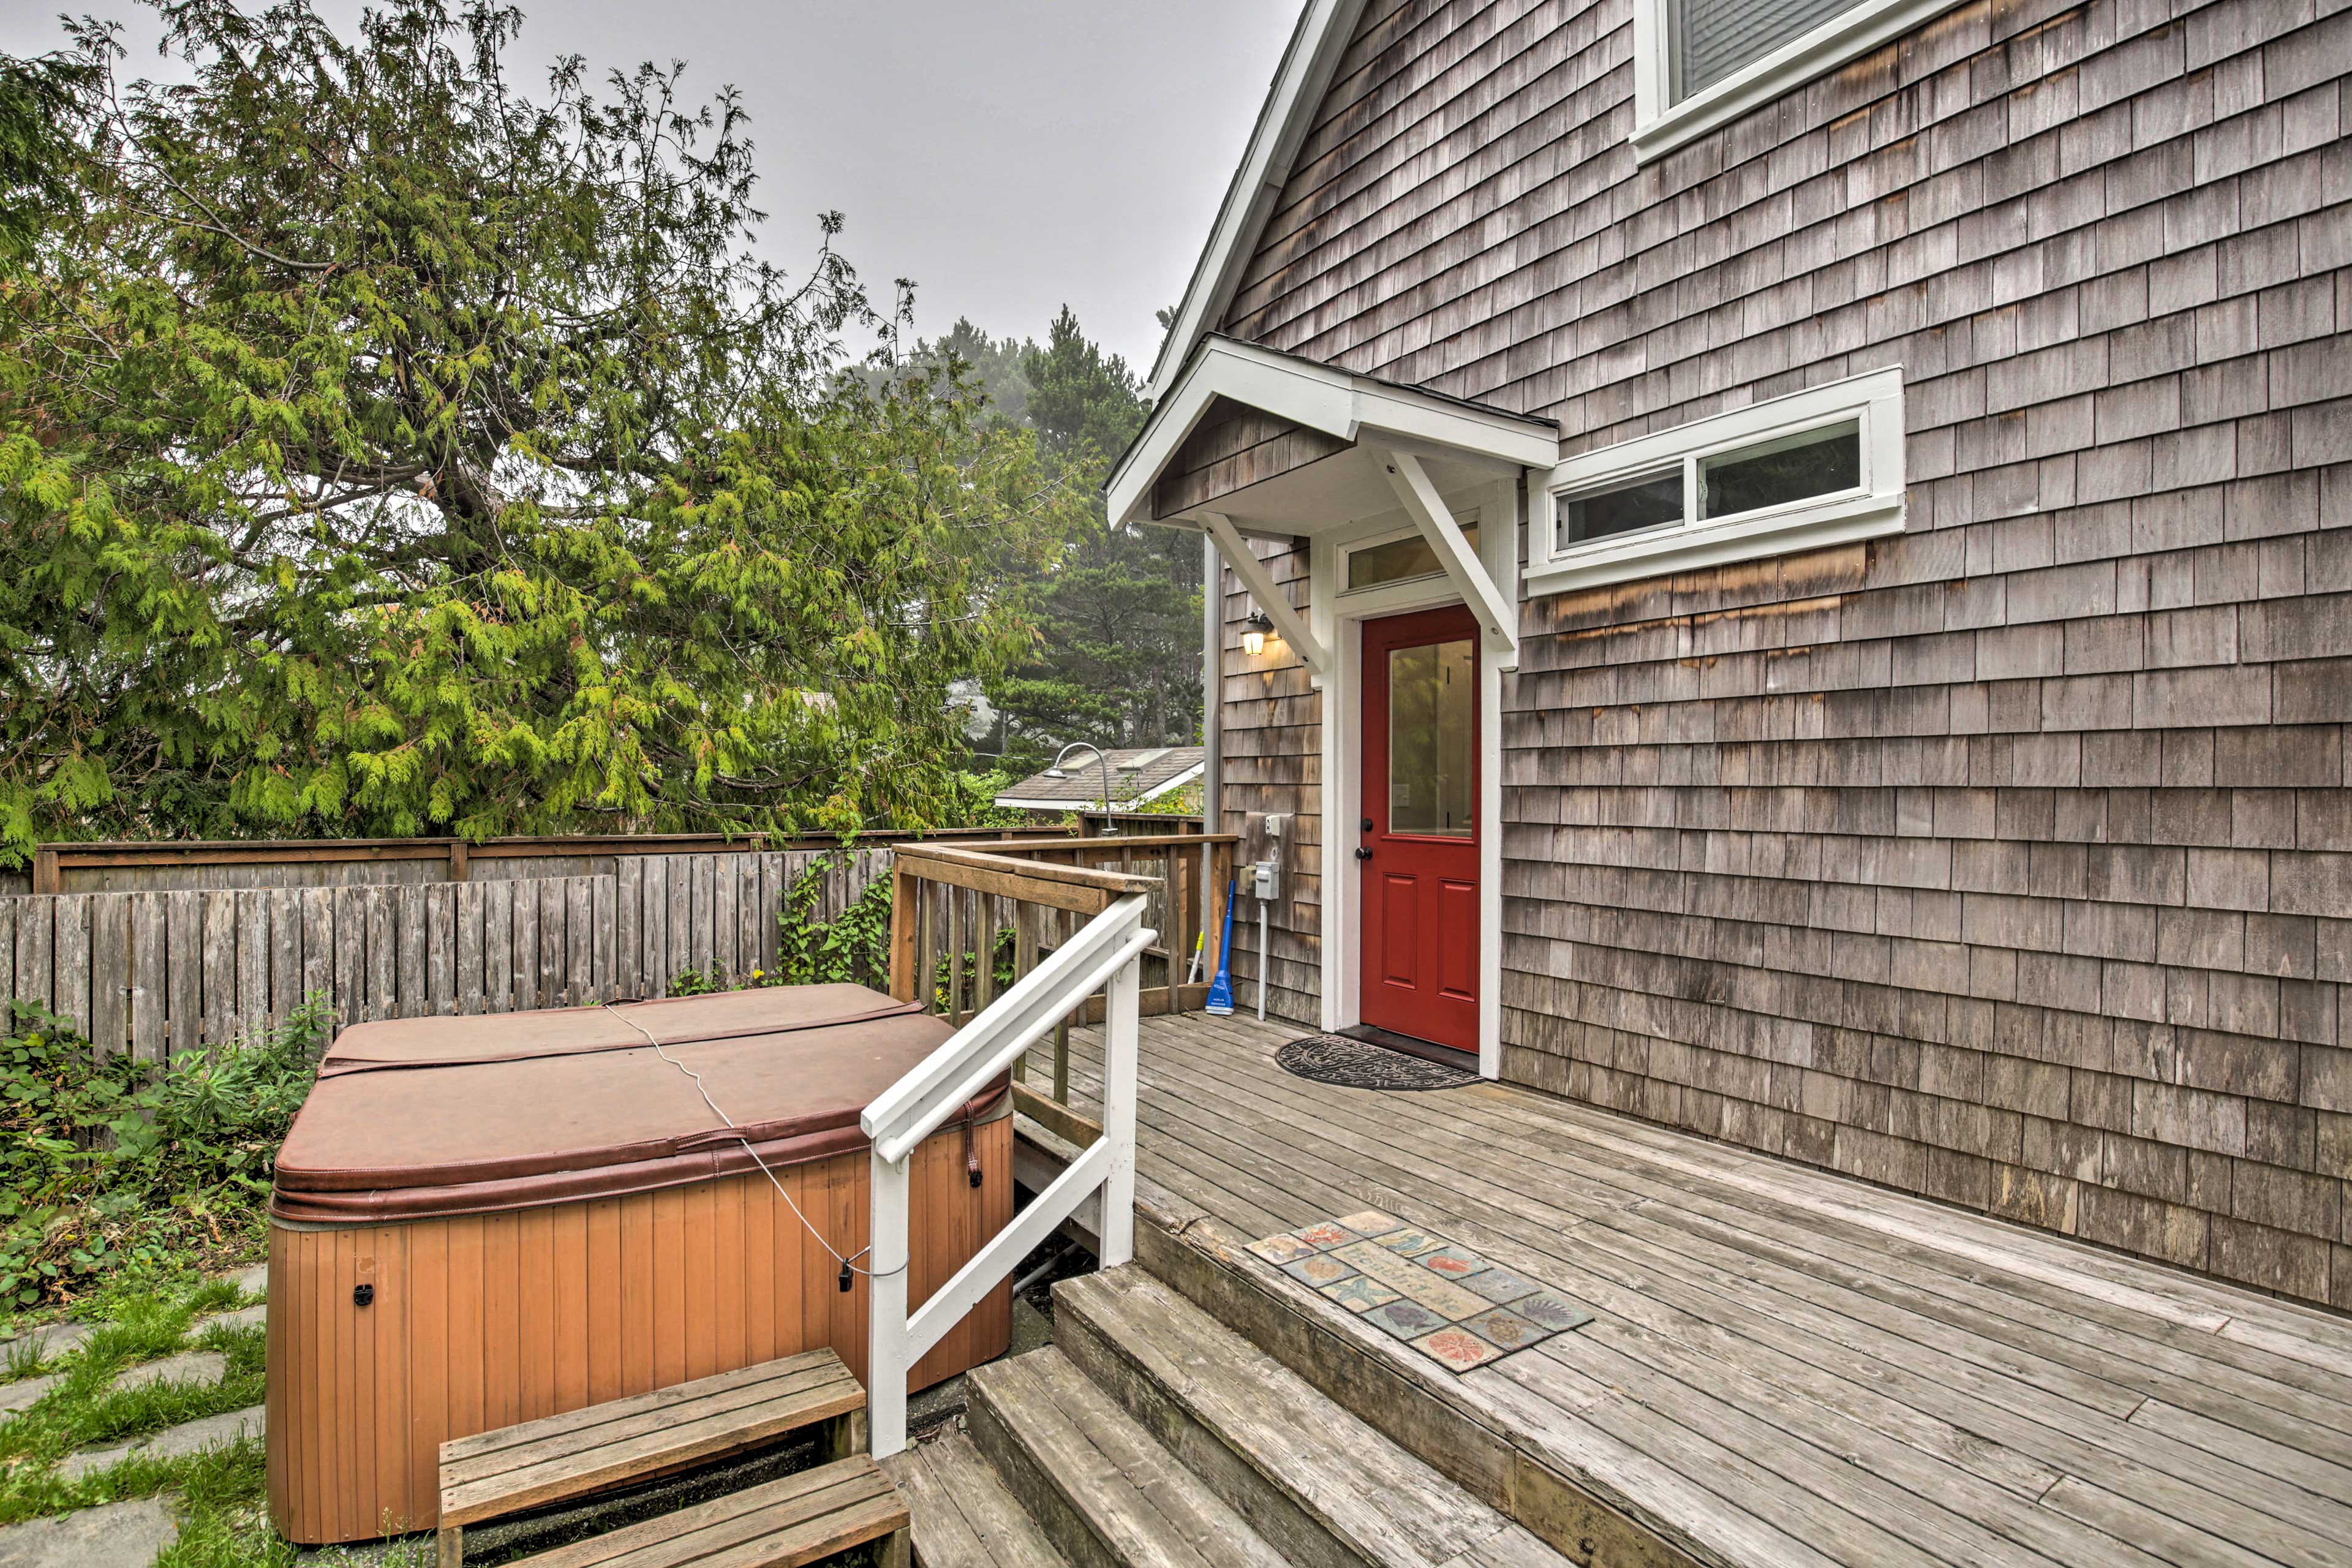 The spacious home boasts a deck and backyard! (Hot Tub Currently Unavailble)